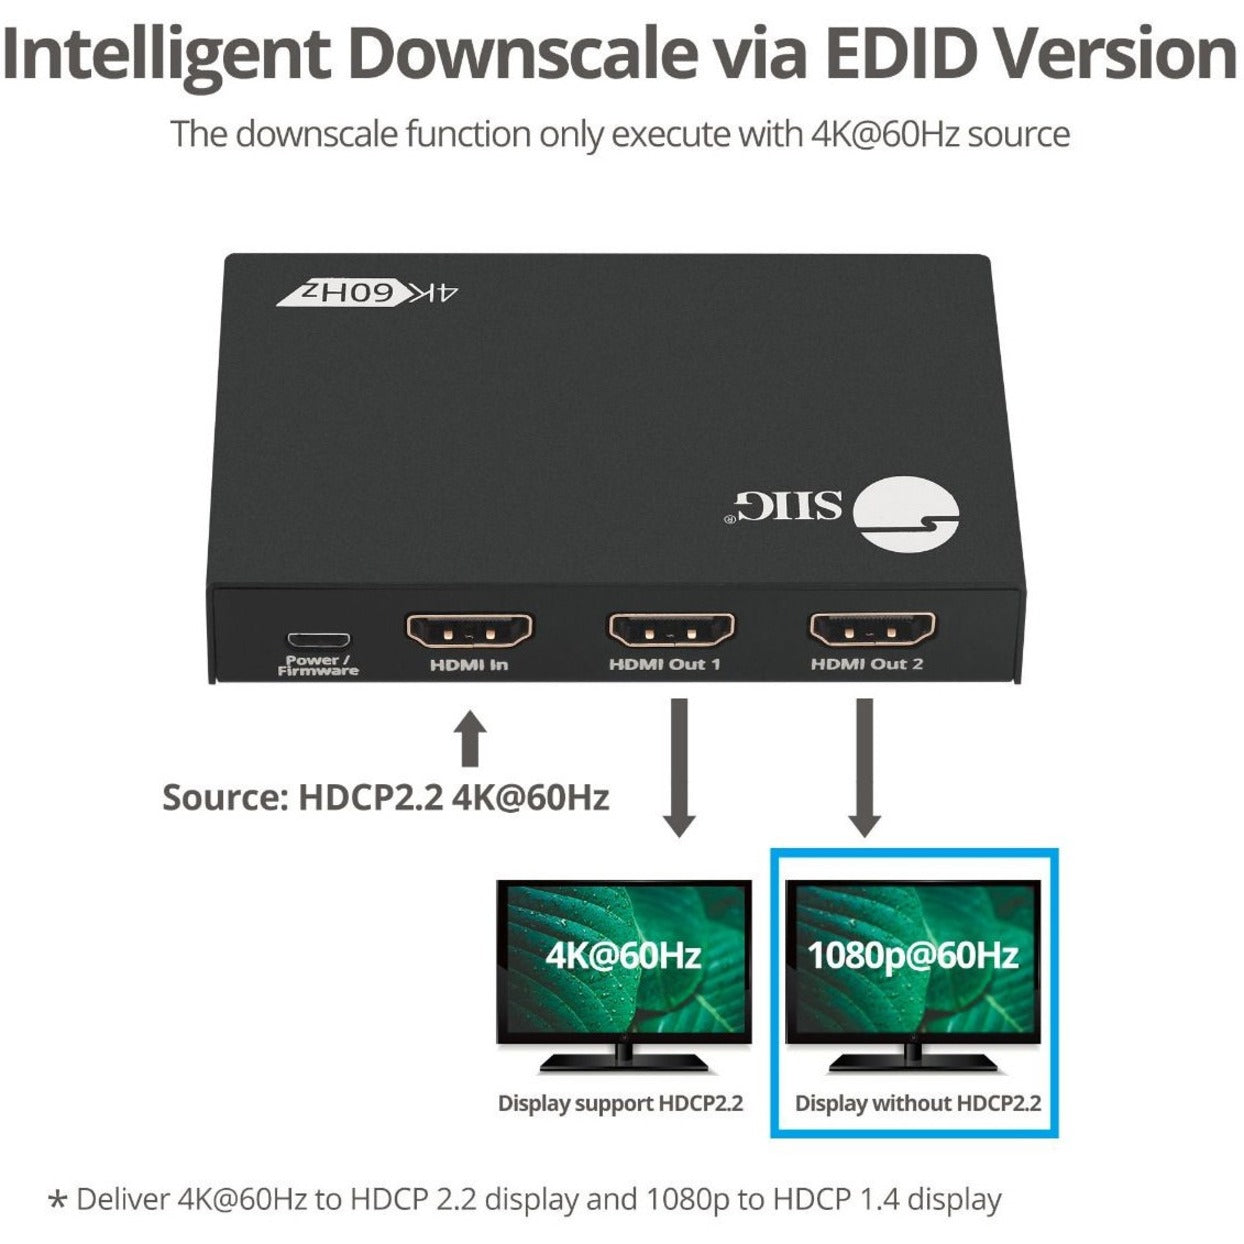 SIIG CE-H26B11-S1 2 Port HDMI 2.0 HDR Splitter with EDID & Downscaler, 4K Video Resolution, 2 Year Warranty